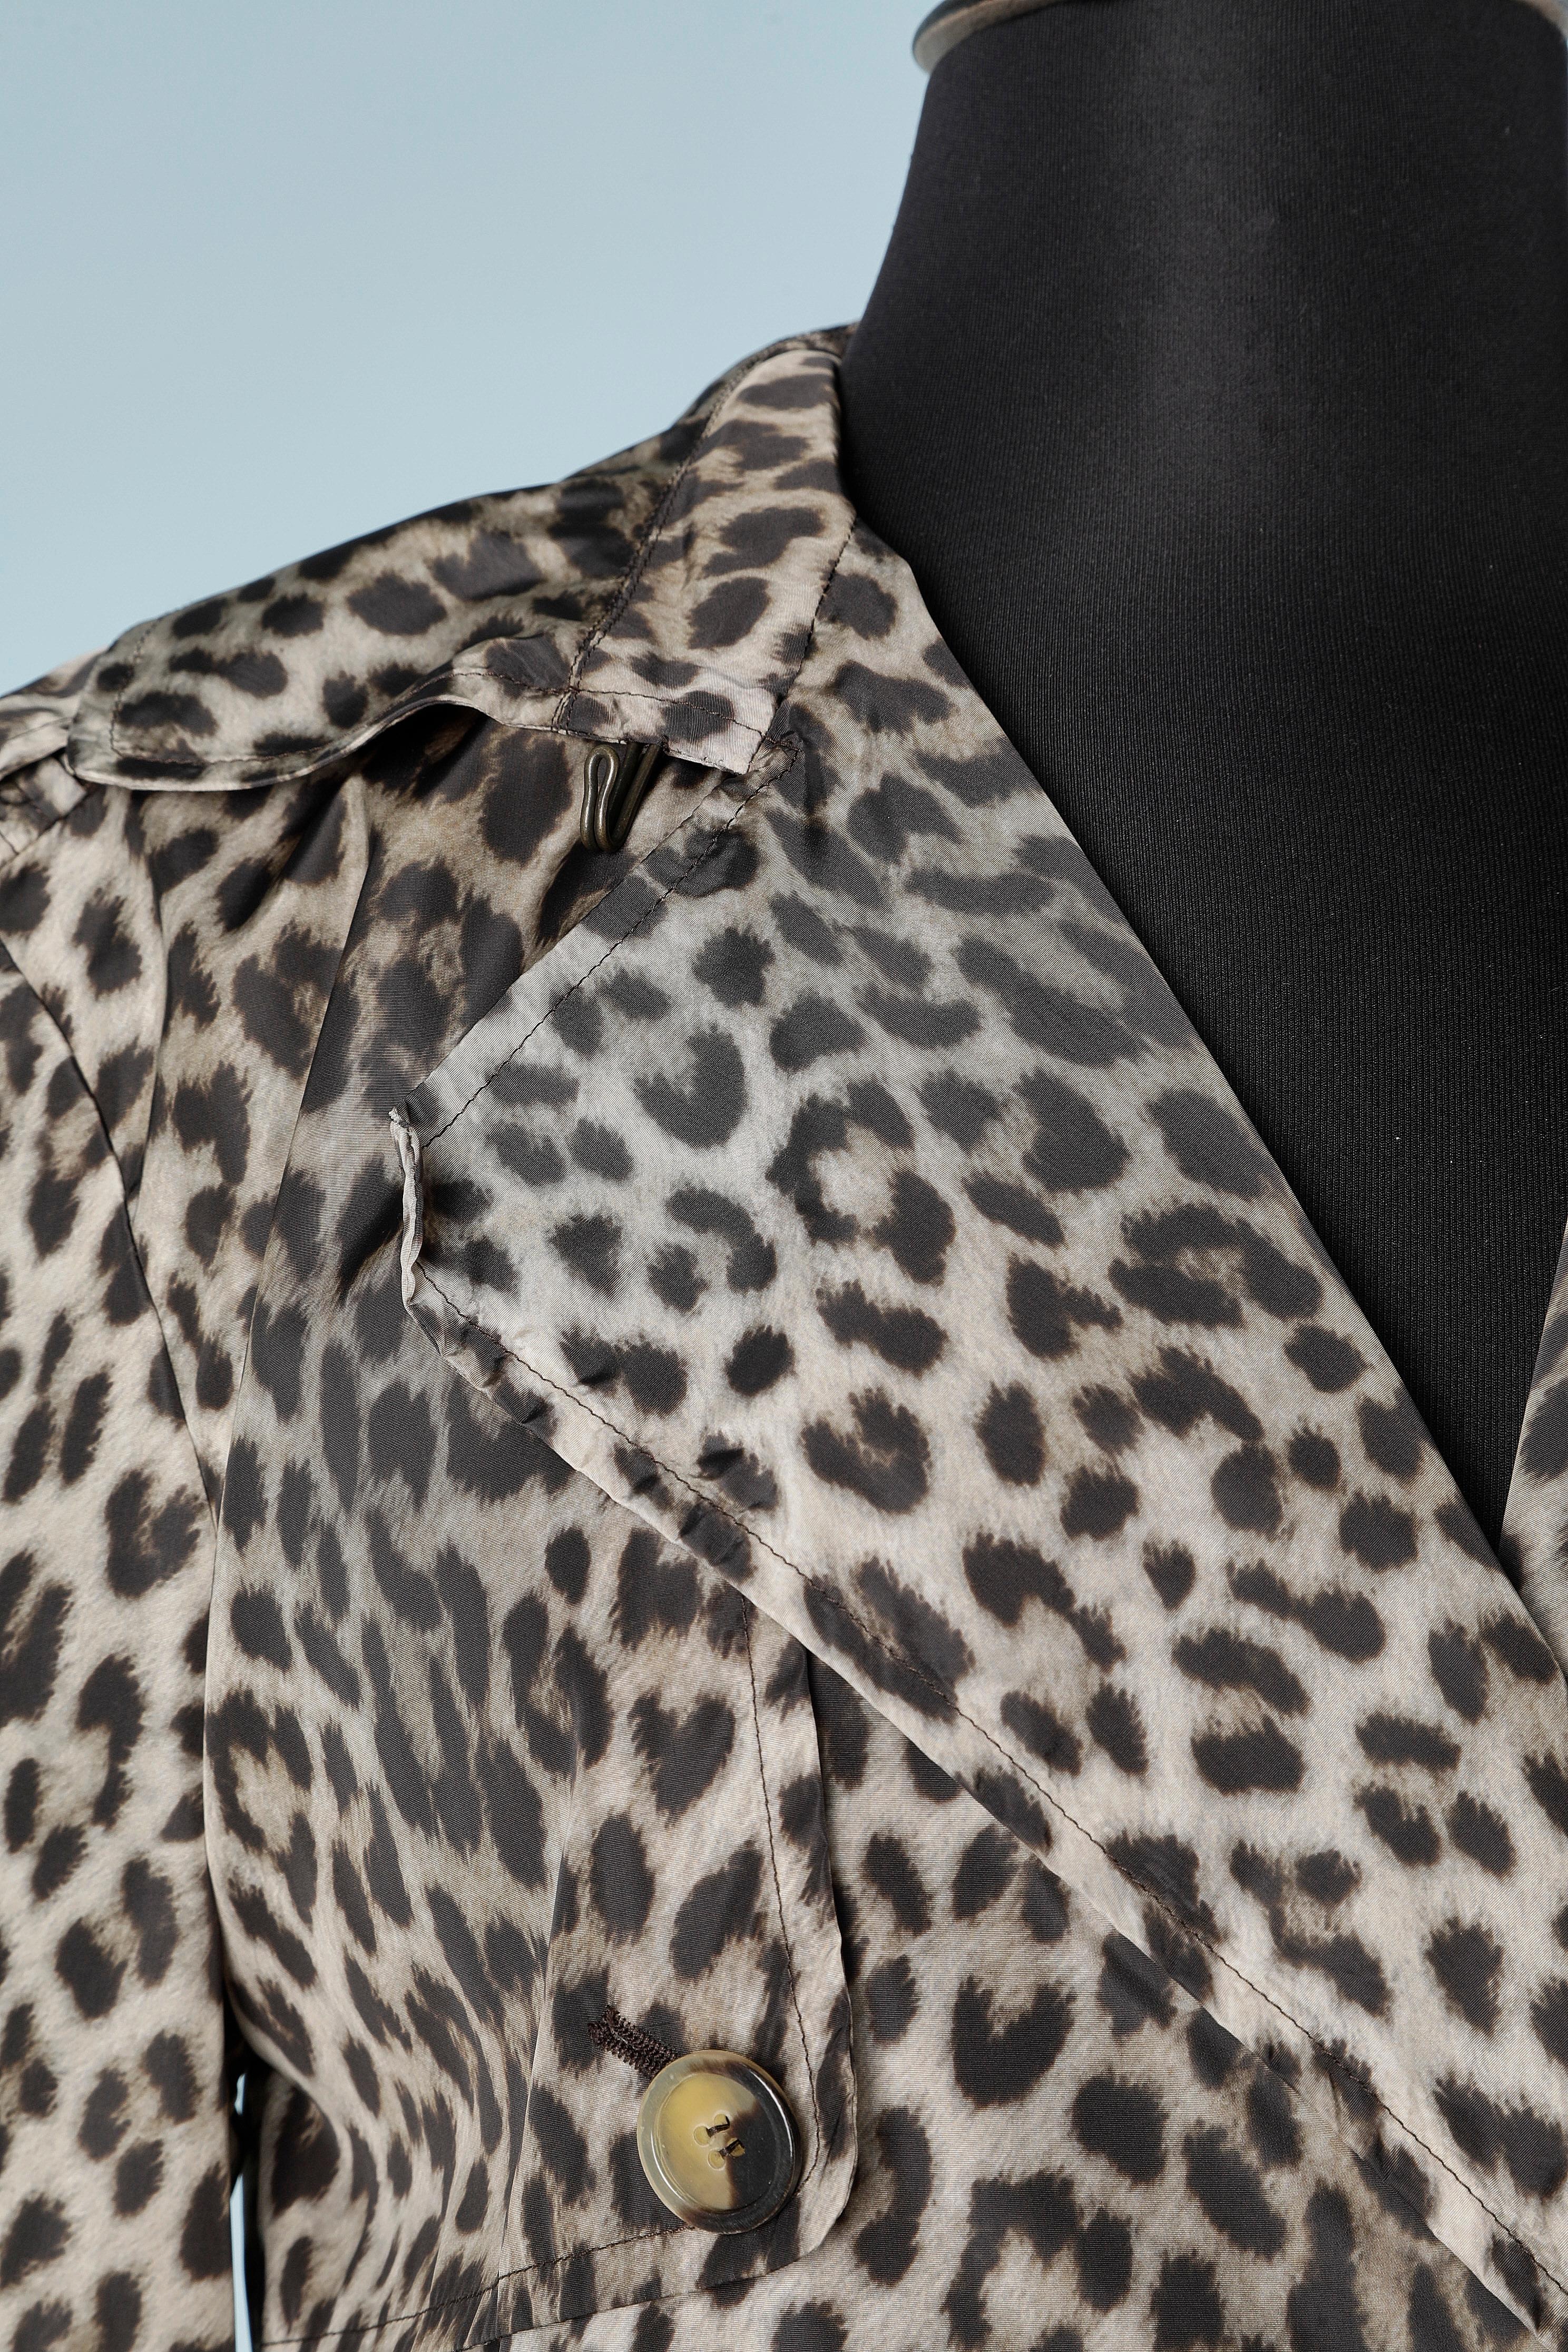 Gray Nylon leopard printed double-breasted trench-coat Lanvin by Alber Elbaz 2010 For Sale